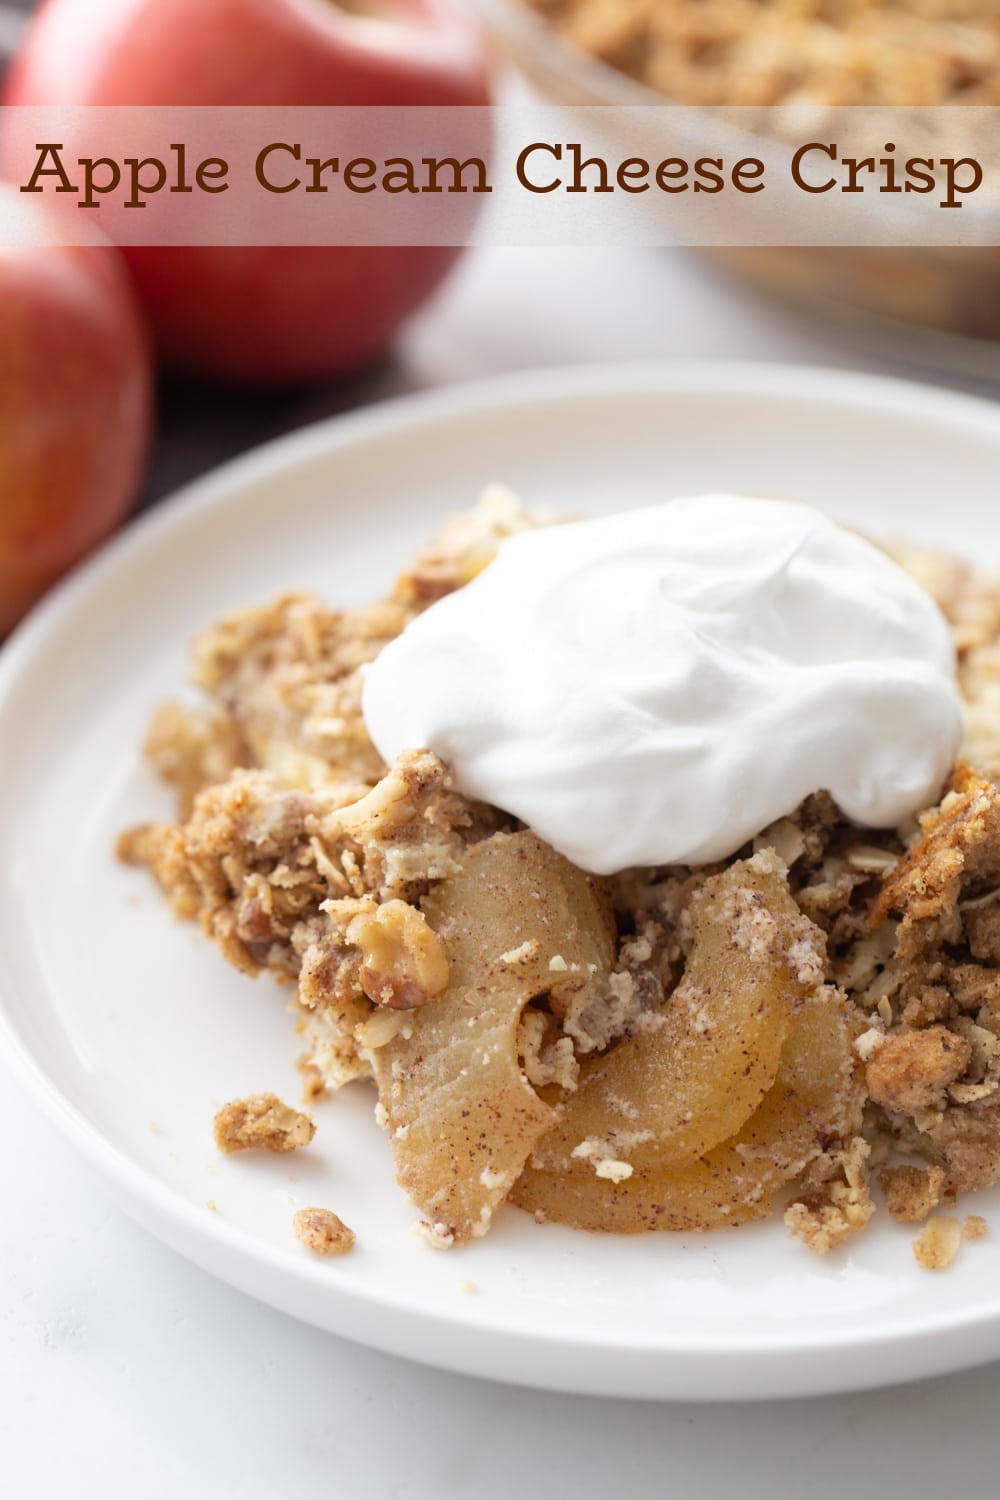 Indulge in the perfect blend of creamy and crunchy with this Cream Cheese Apple Crisp recipe. The warmth of baked apples and the richness of cream cheese add an exciting twist to your traditional apple crisp ensemble. via @cmpollak1